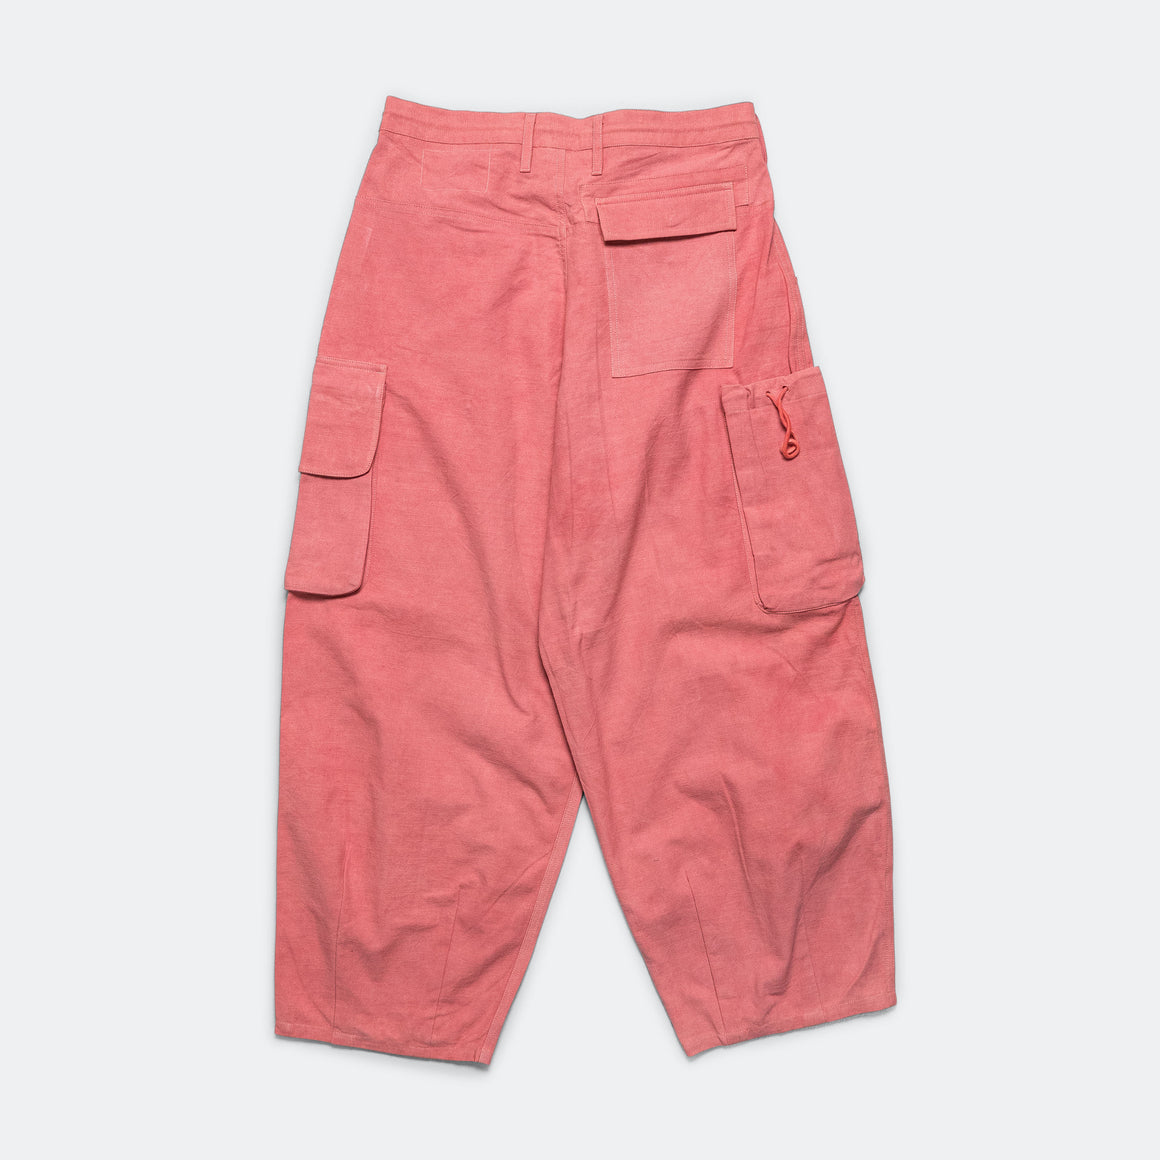 Story mfg. - Forager Pants - Ancient Pink Slub - UP THERE